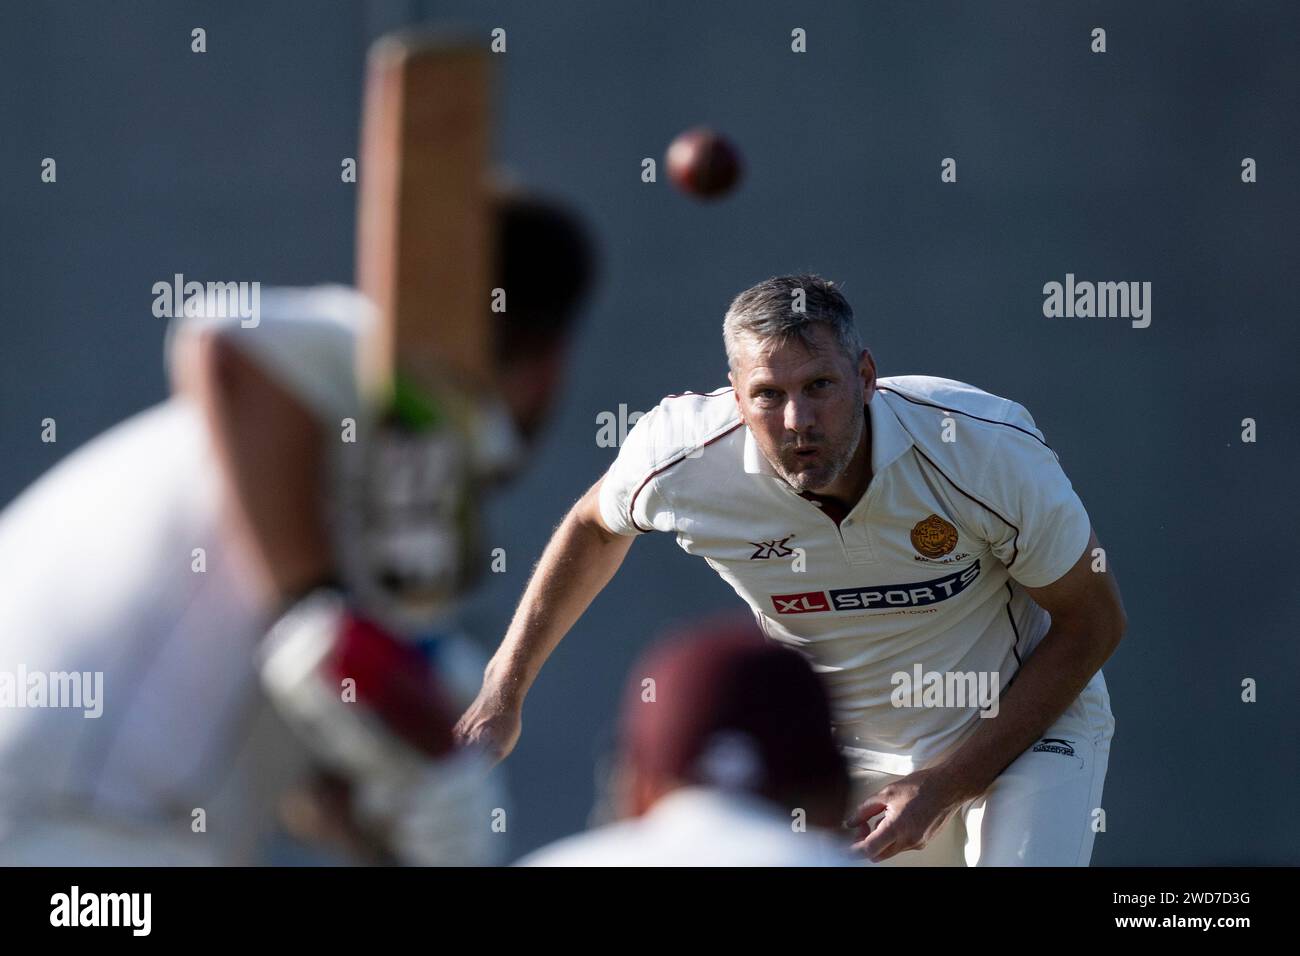 Cricket, Melone in Aktion. Stockfoto